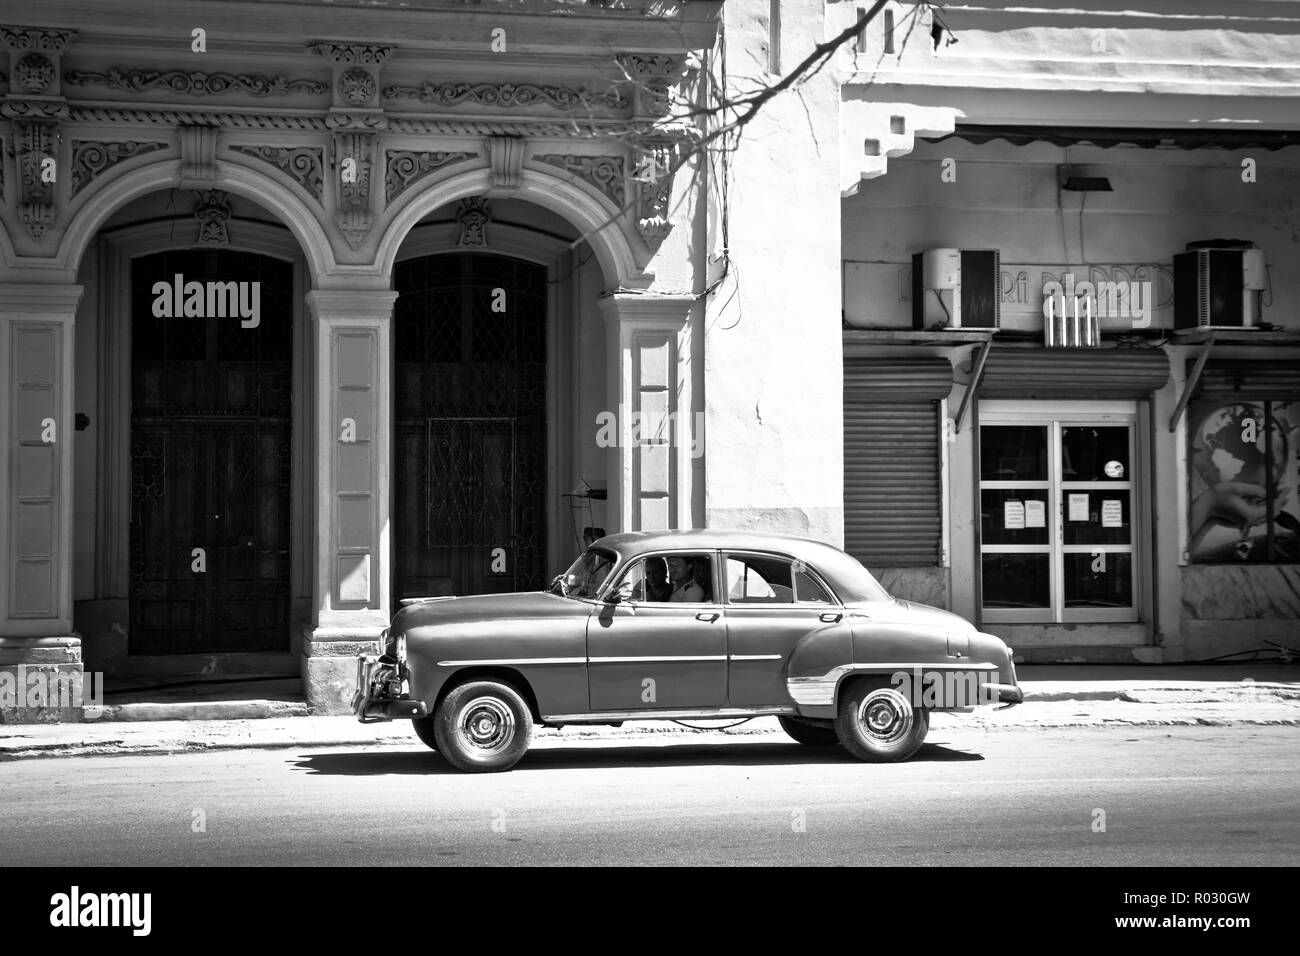 Havana is Cuba’s capital city dominated be Spanish colonial architecture.  The National Capitol Building is an iconic 1920s landmark. Classic cars ... Stock Photo